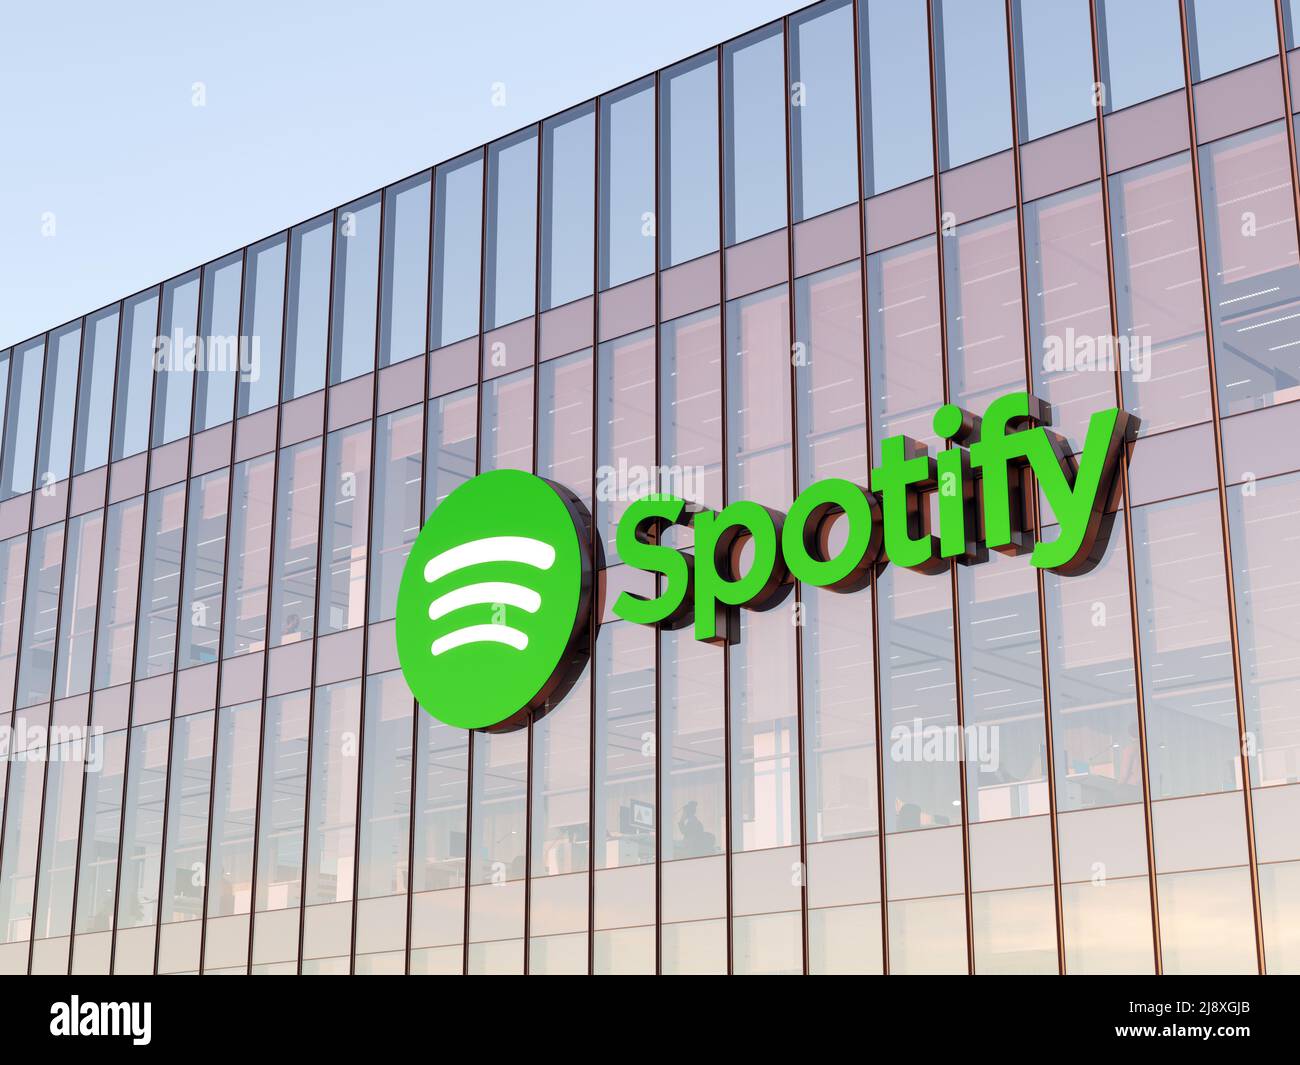 https://c8.alamy.com/comp/2J8XGJB/stockholm-sweden-may-2-2022-editorial-use-only-3d-cgi-spotify-signage-logo-on-top-of-glass-building-workplace-multinational-streaming-and-media-2J8XGJB.jpg